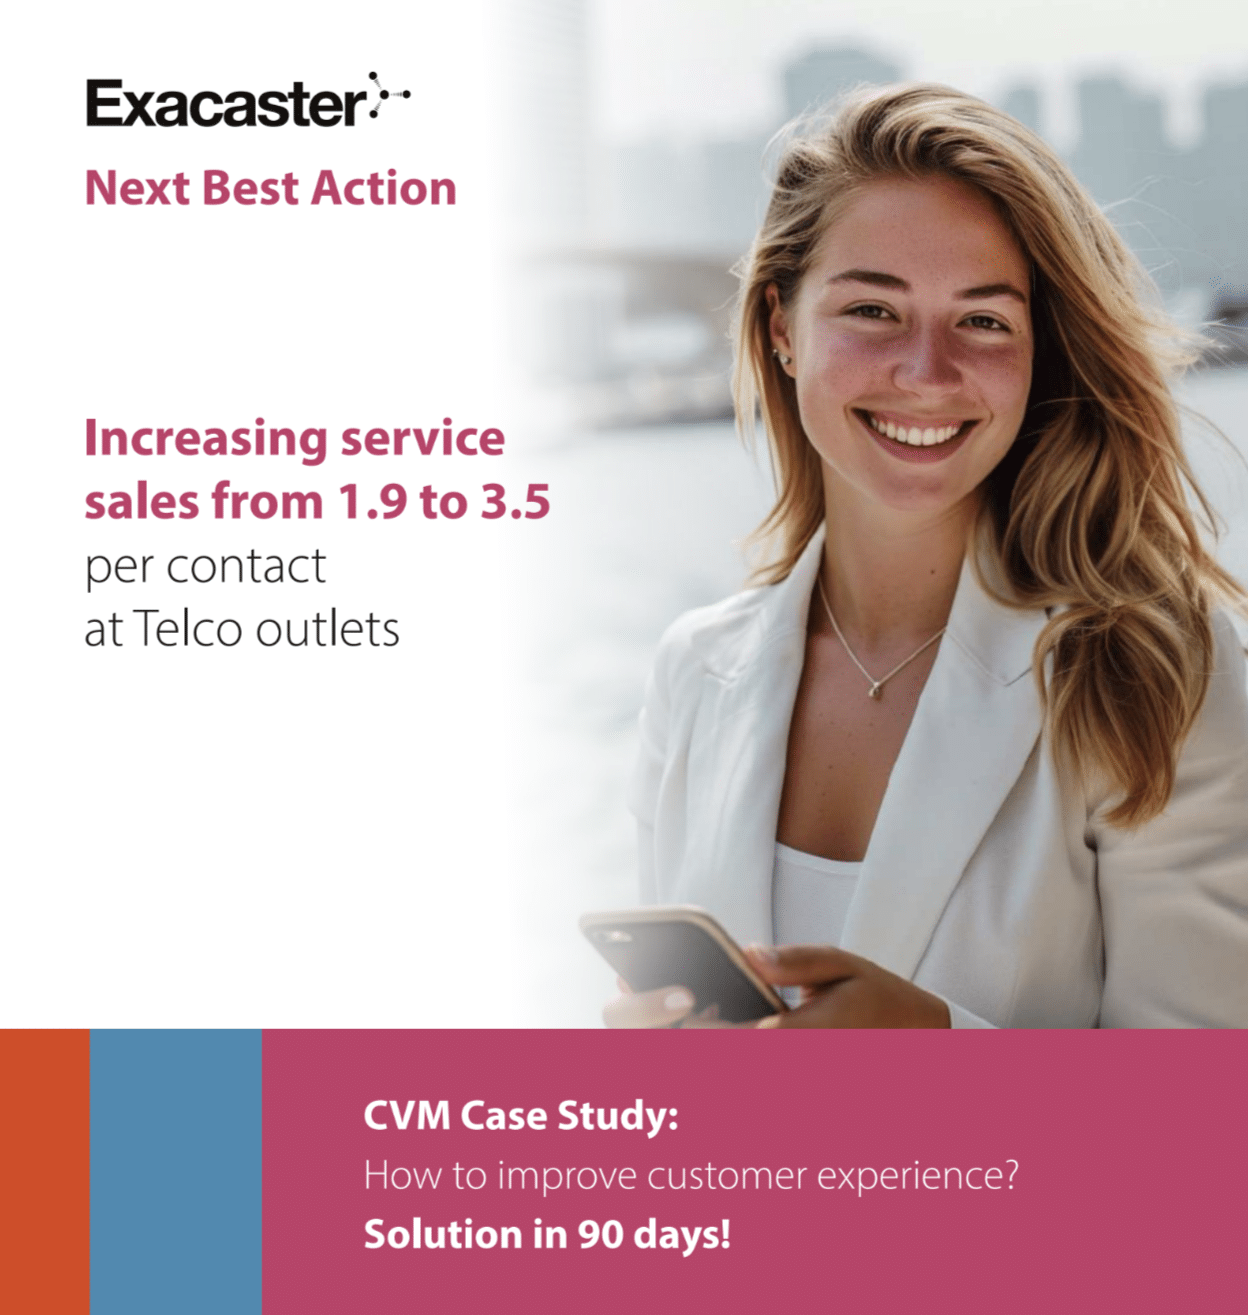 CVM Case Study: Next Best Action. Increasing service sales from 1.9 to 3.5 per contact at Telco outlets